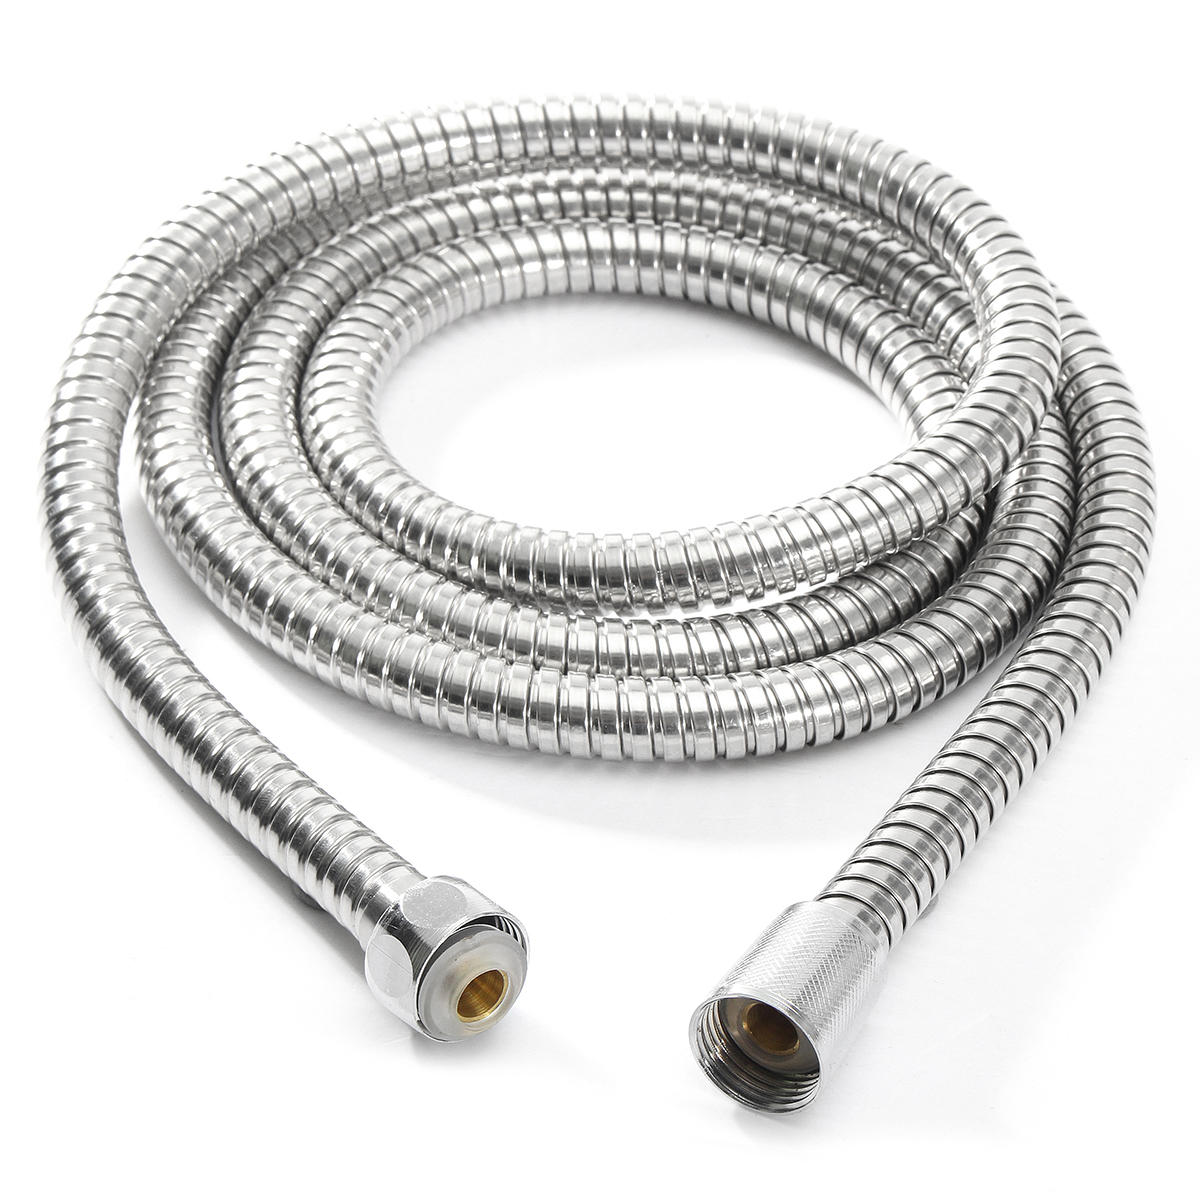 1m/1.5m/2m Stainless Steel Bathroom Flexible Shower Hose Water Head Pipe G1/2 Thread Interface